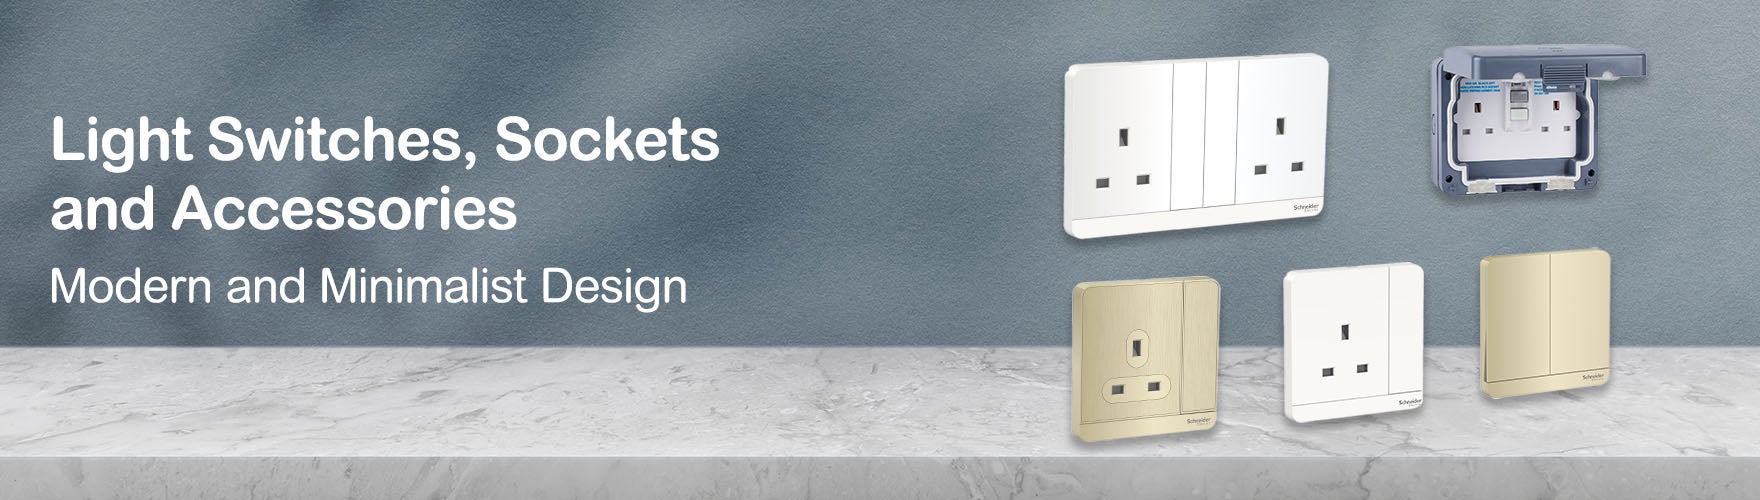 Light Switches Sockets and Accessories